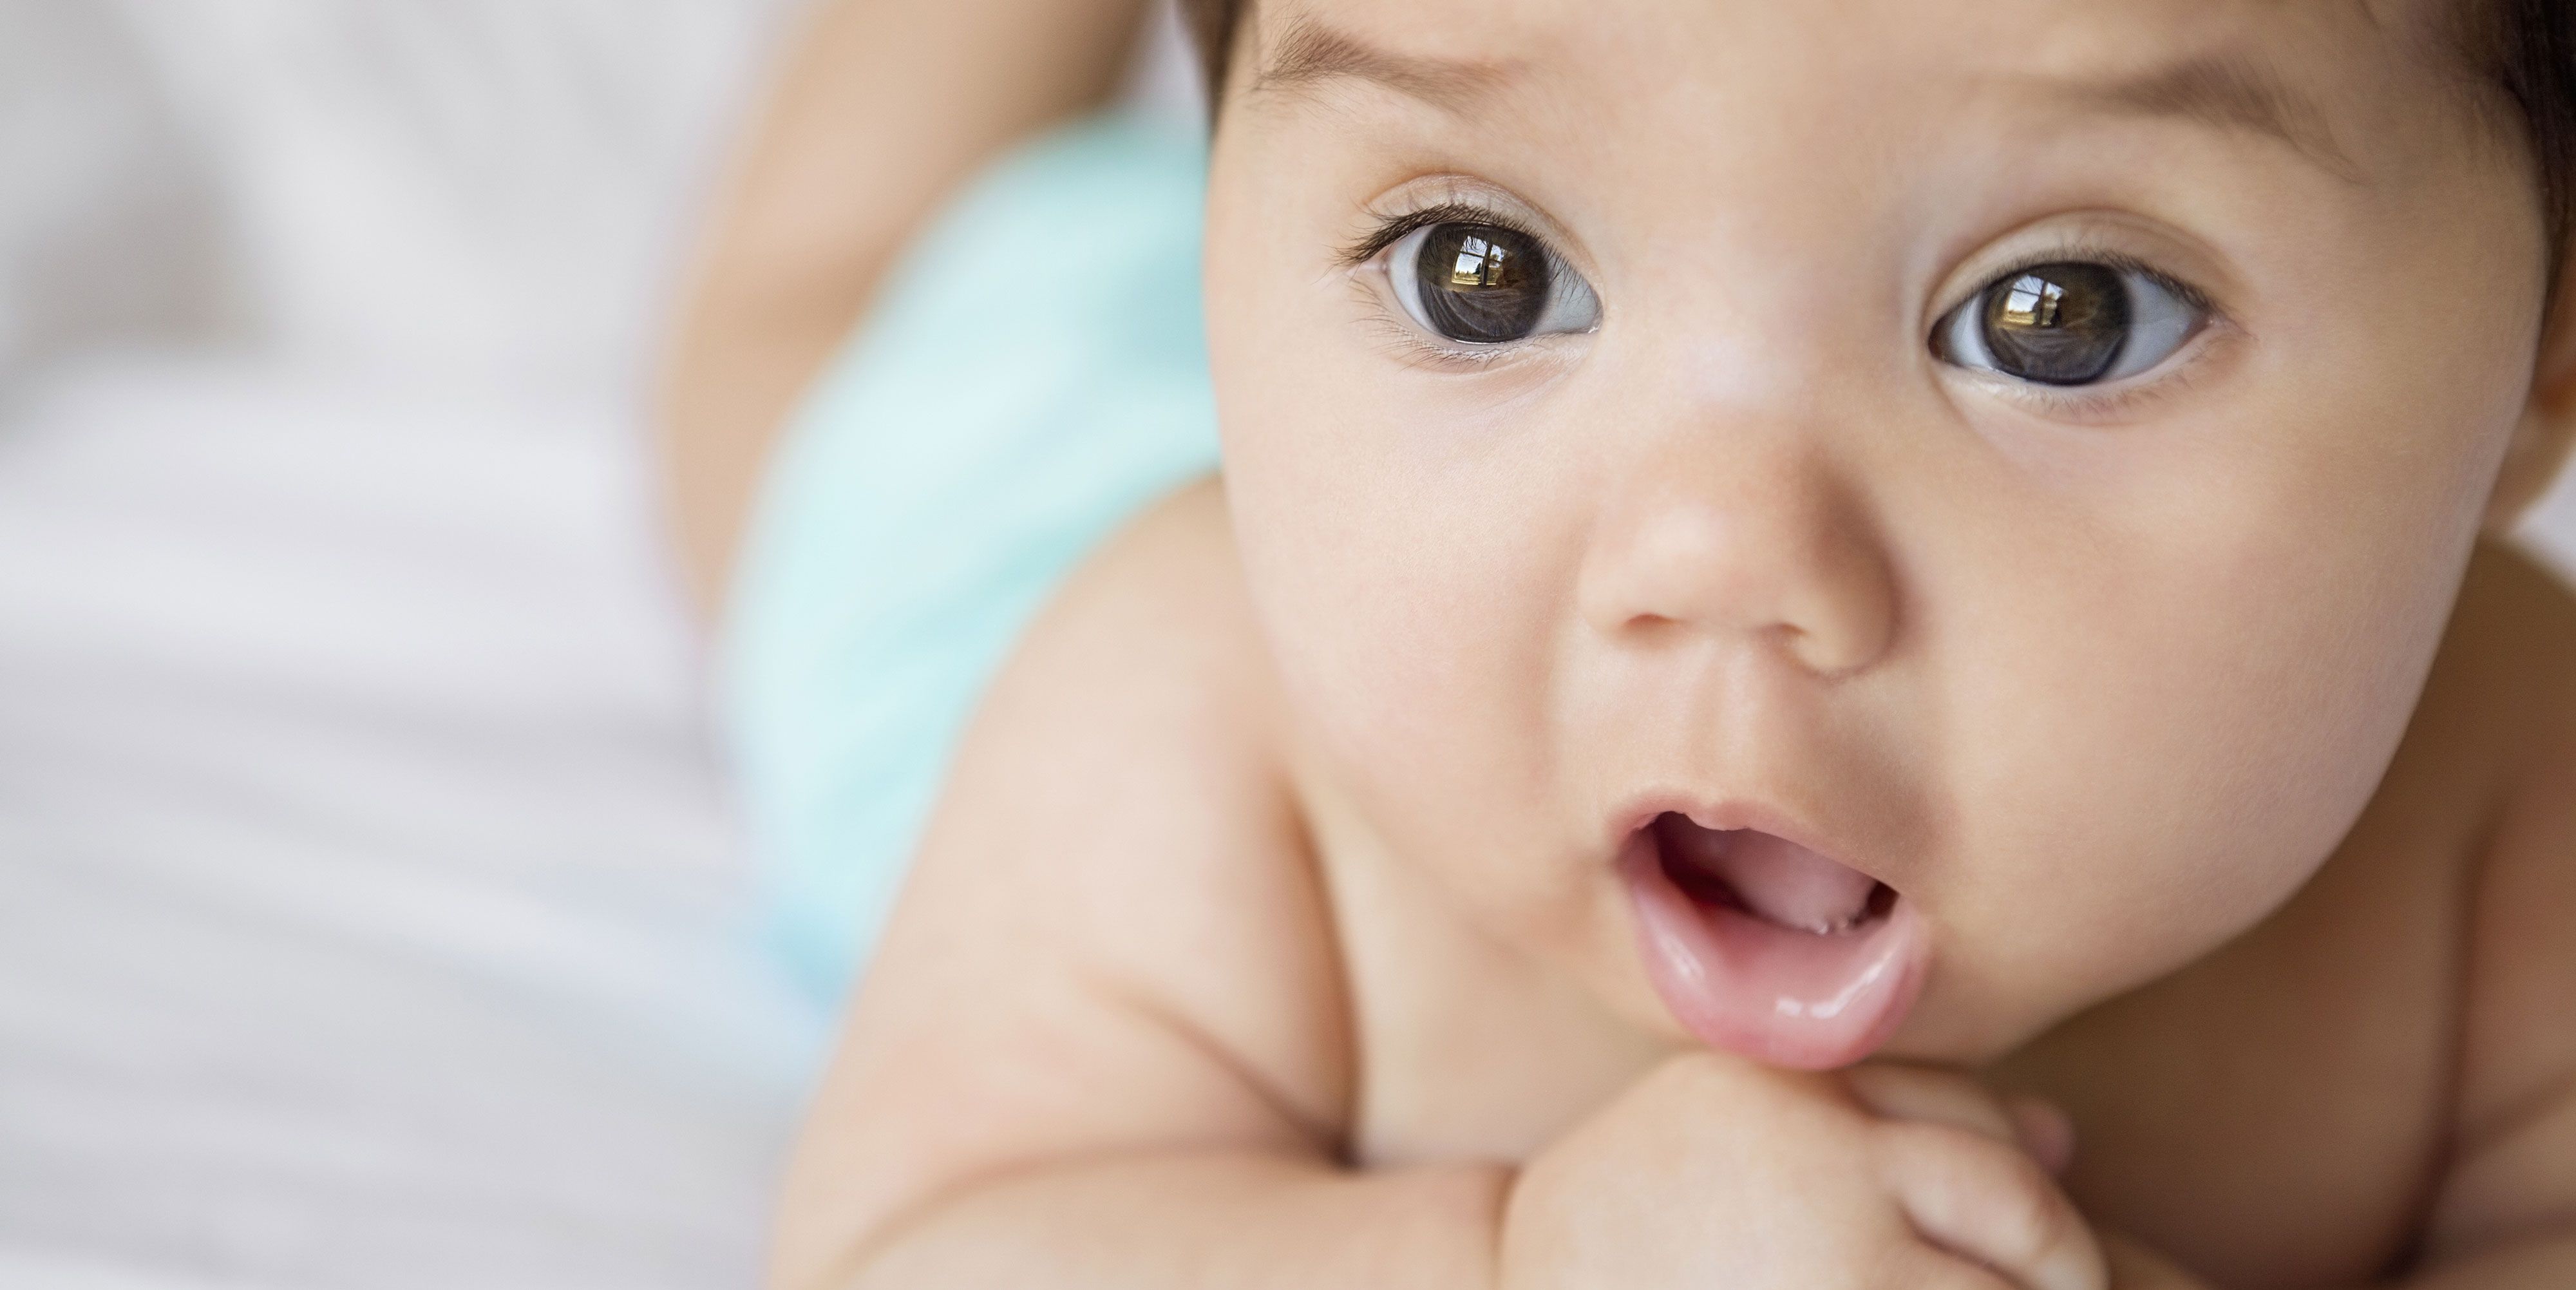 17 Things No One Tells You About Parenting a Baby Girl